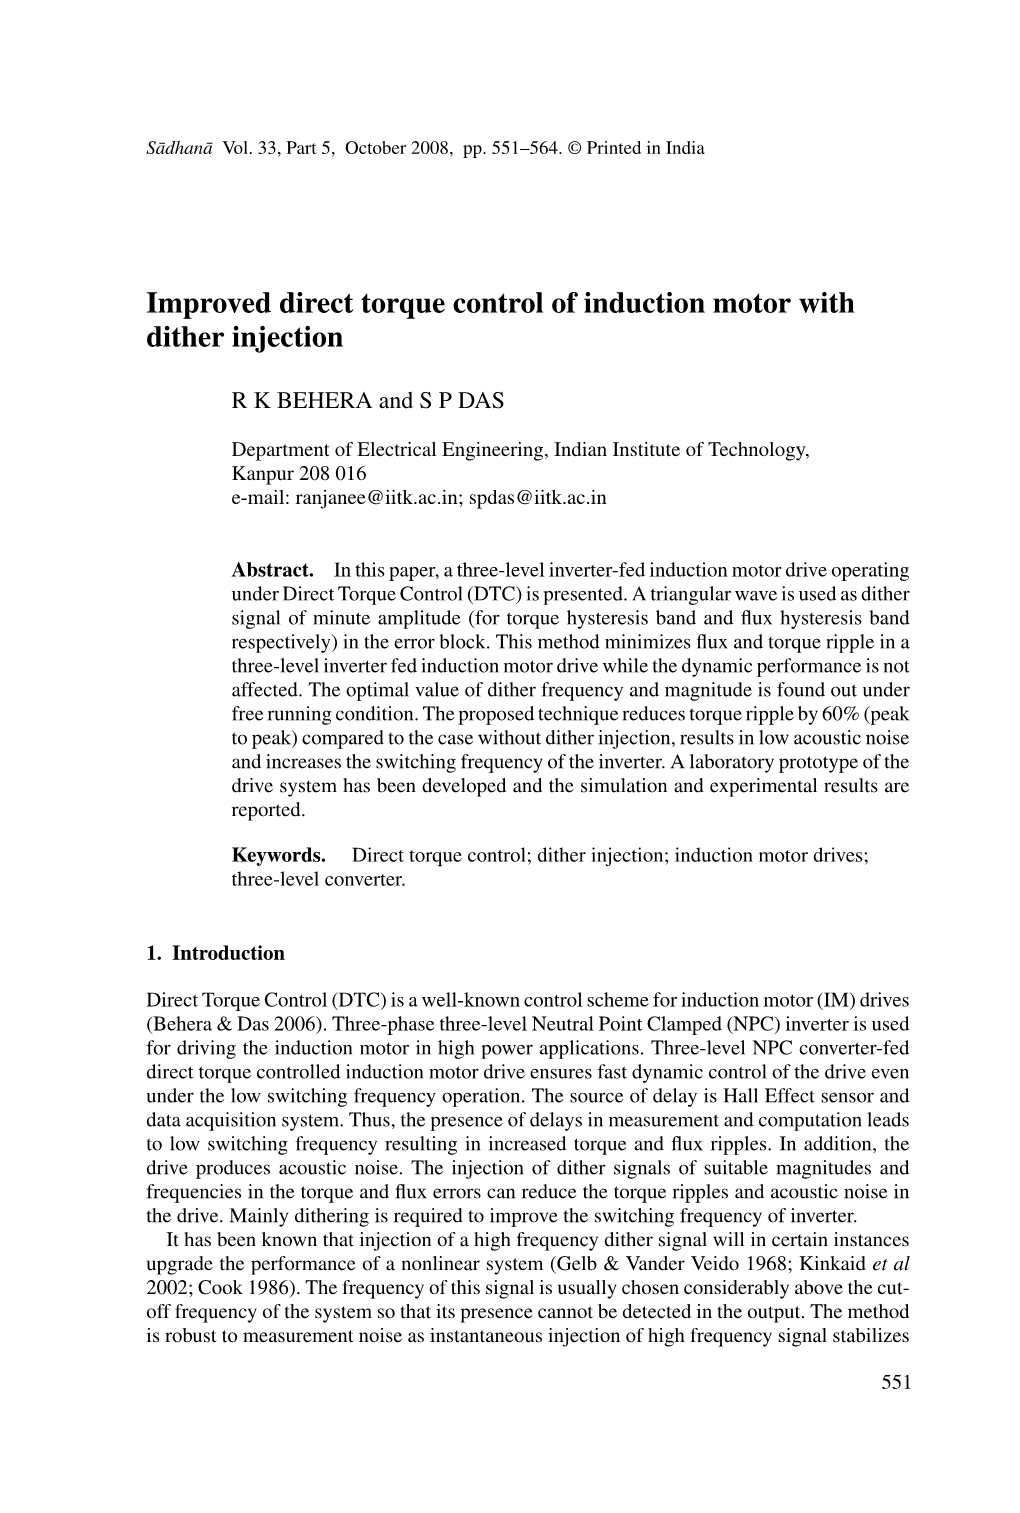 Improved Direct Torque Control of Induction Motor with Dither Injection